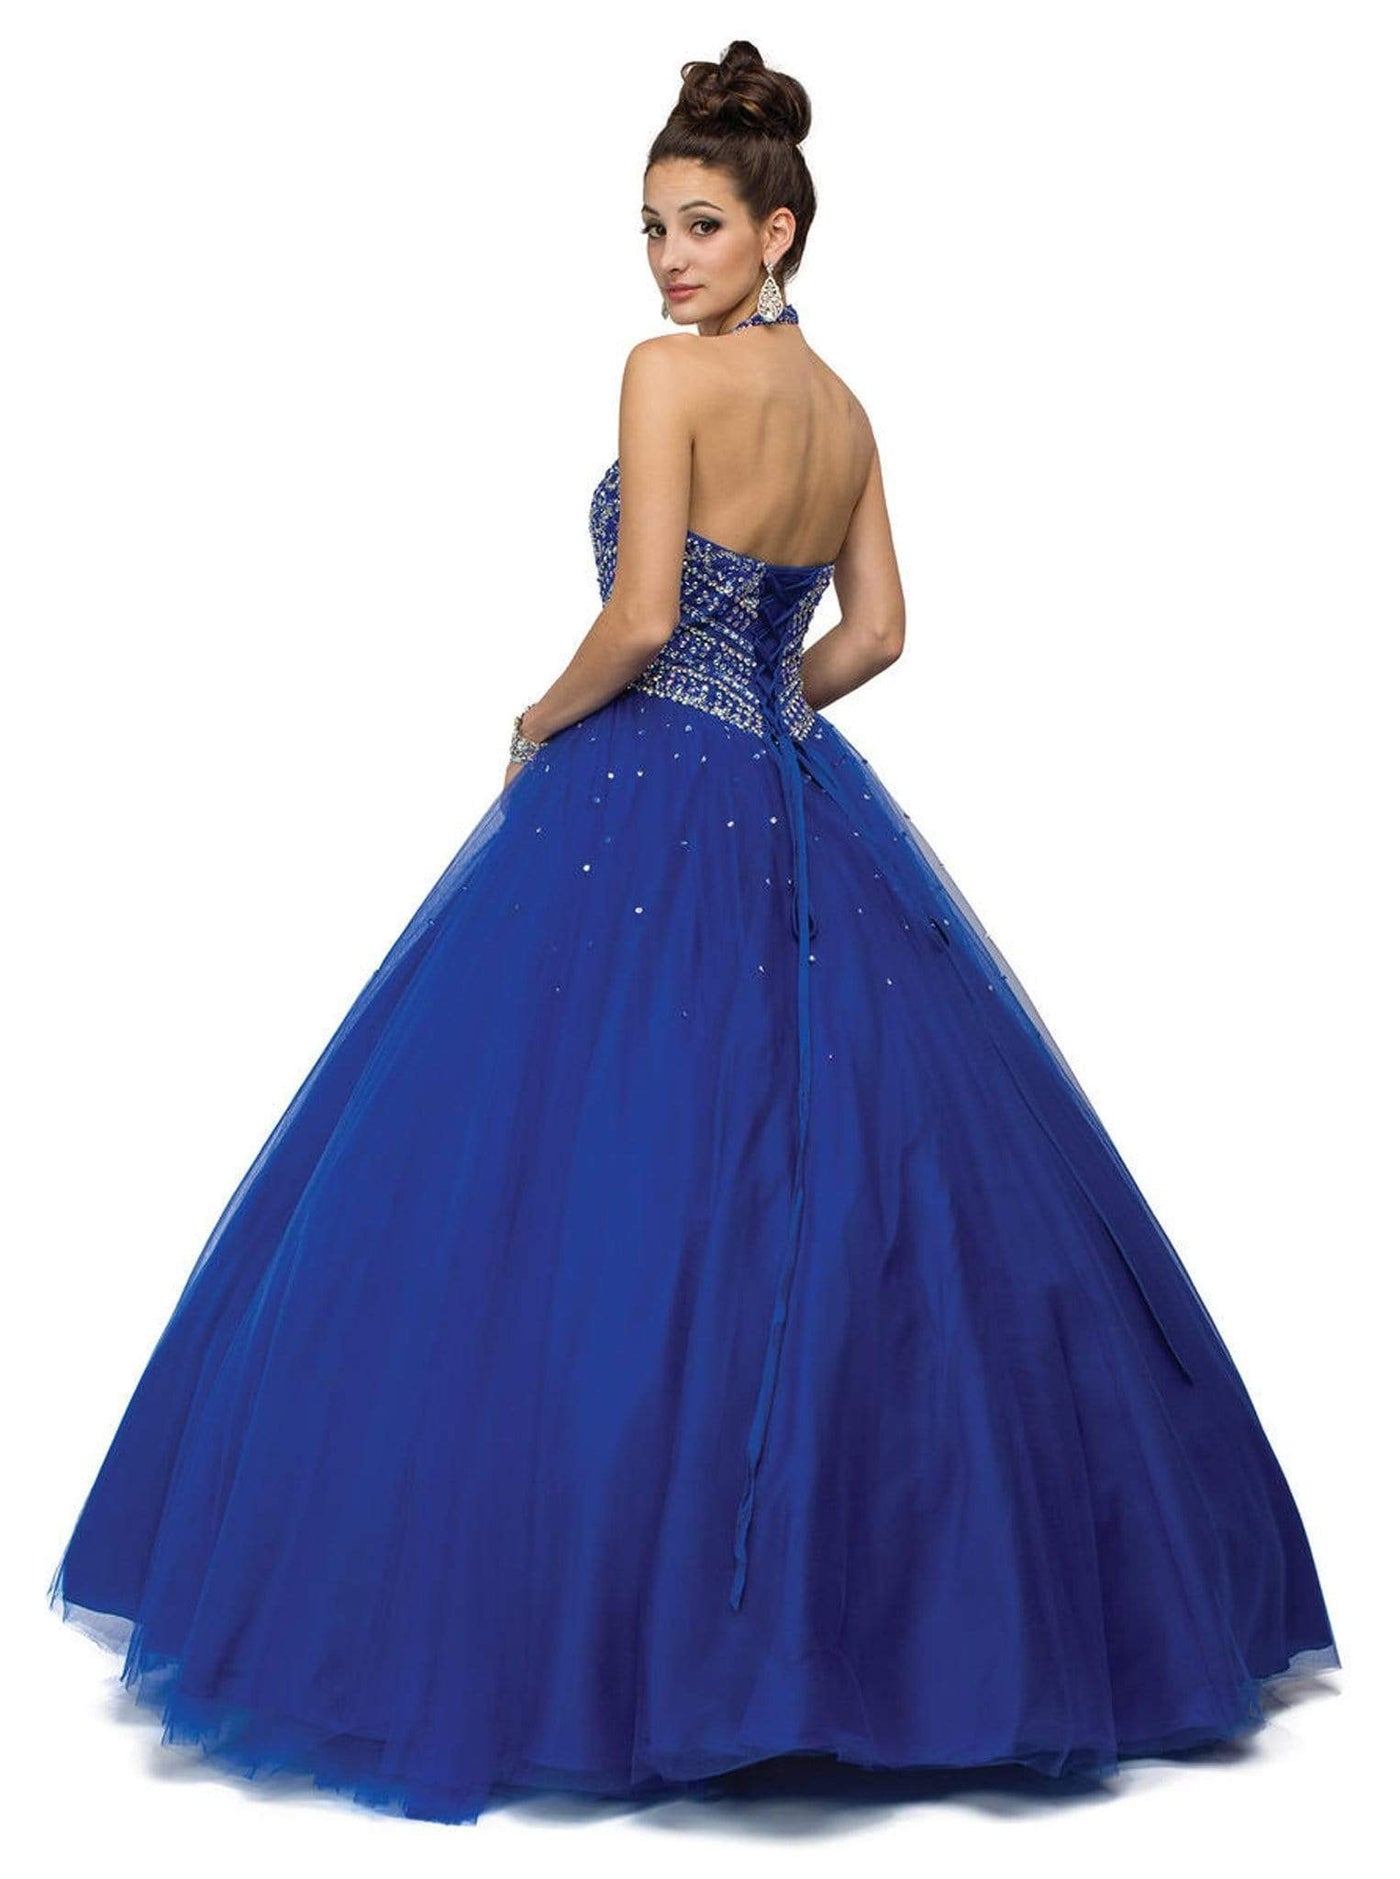 Dancing Queen - 1107 Sleeveless Beaded Halter Quinceanera Gown Special Occasion Dress XL / Royal Blue